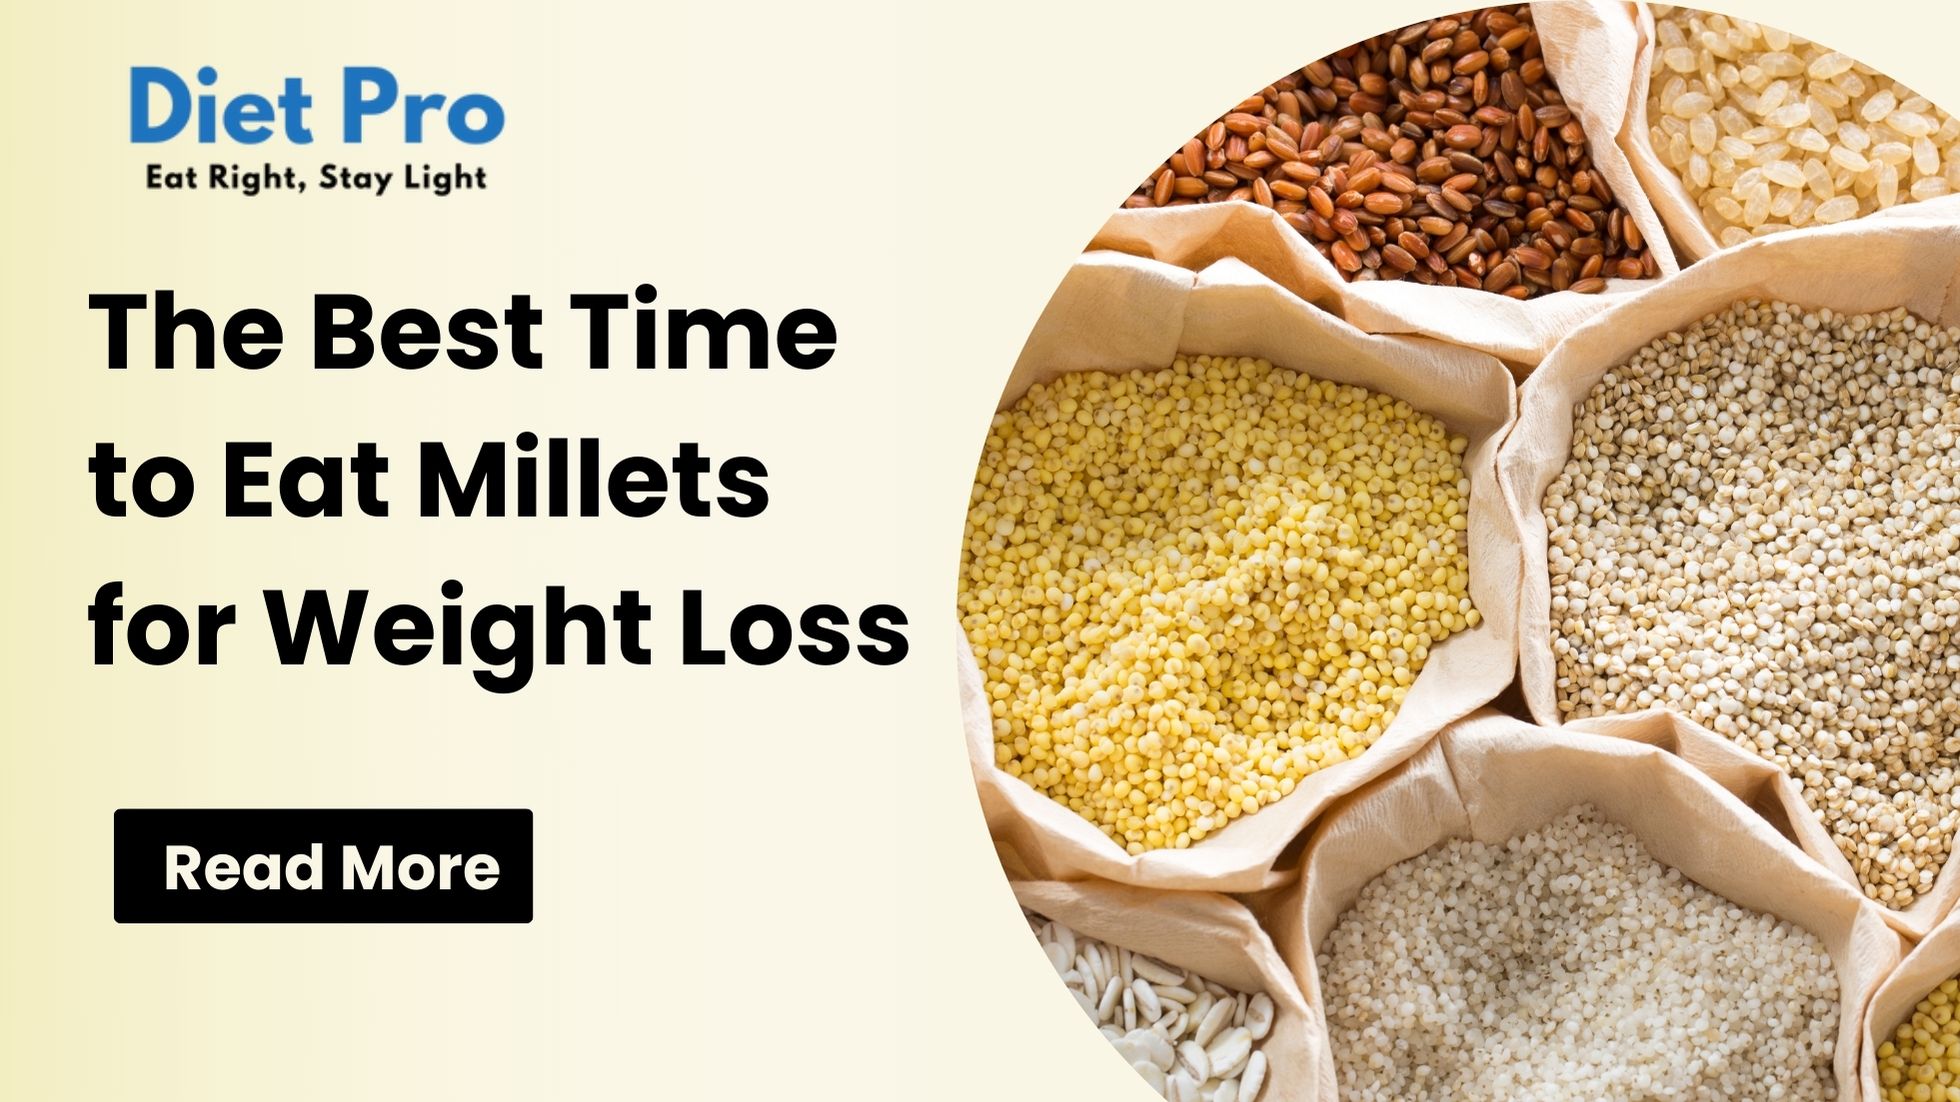 Best Time to Eat Millets for Weight Loss